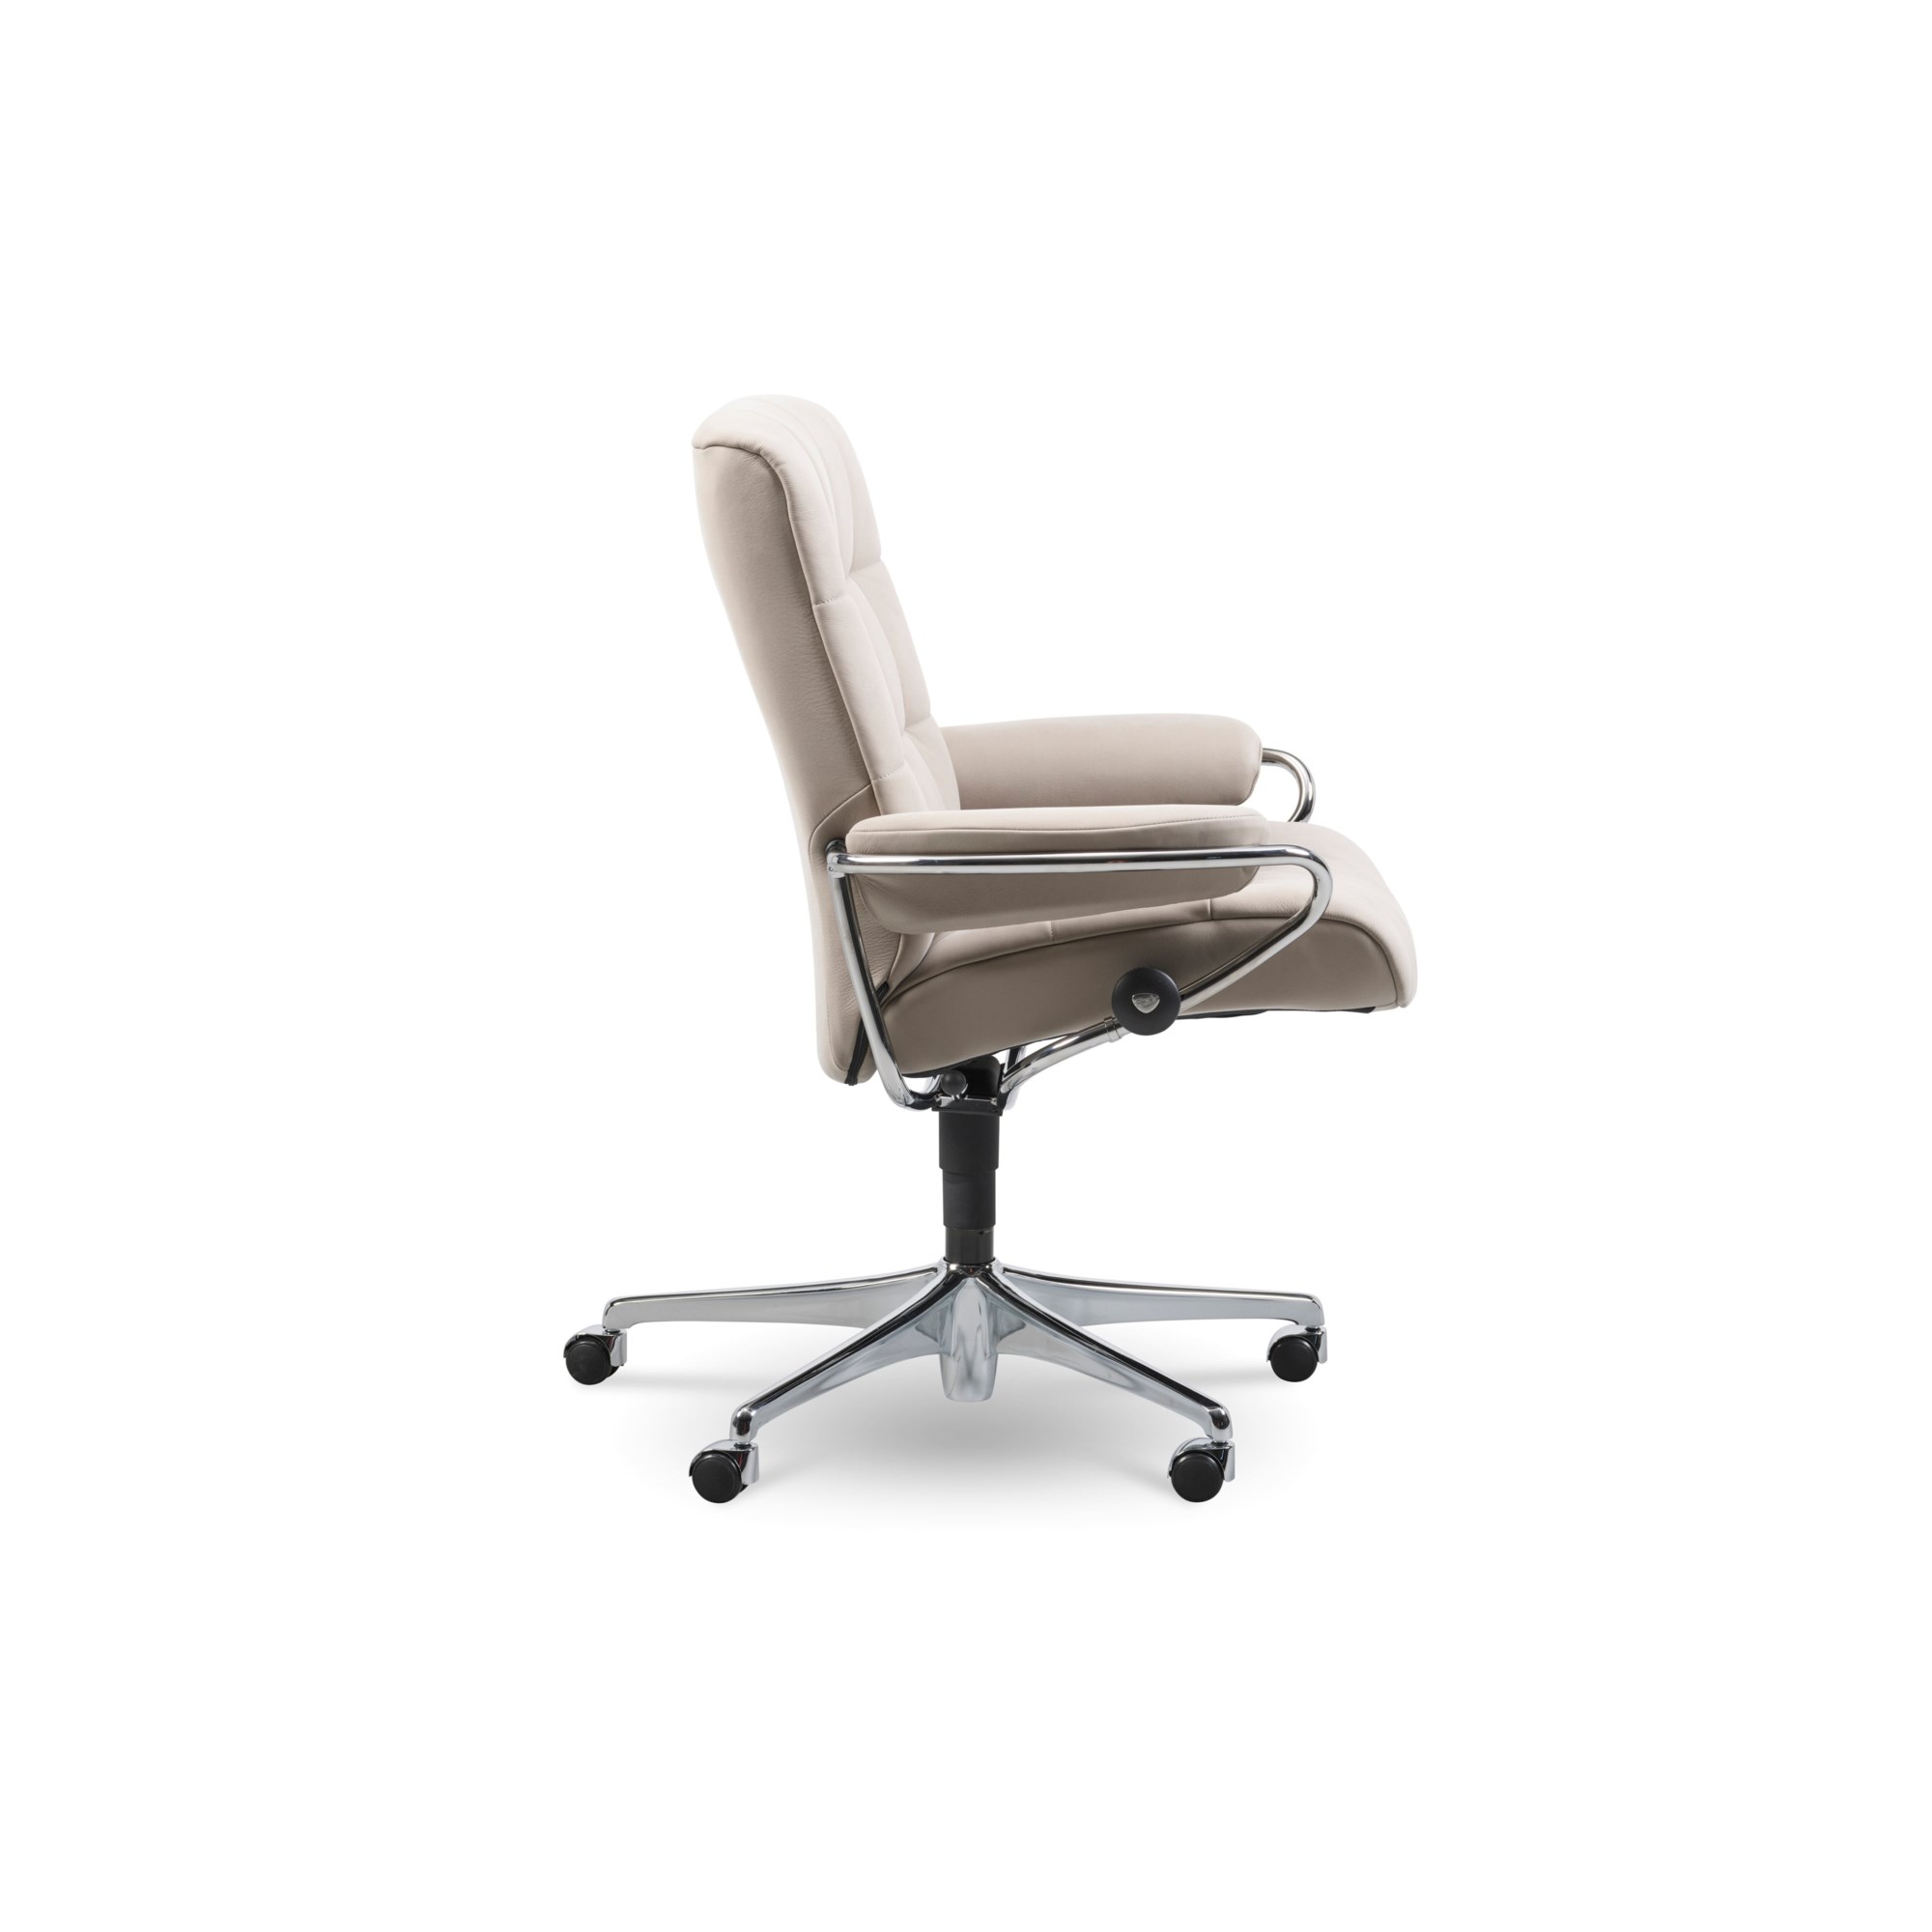 Stressless by Ekornes London 1339097 Office Chair with Low Back